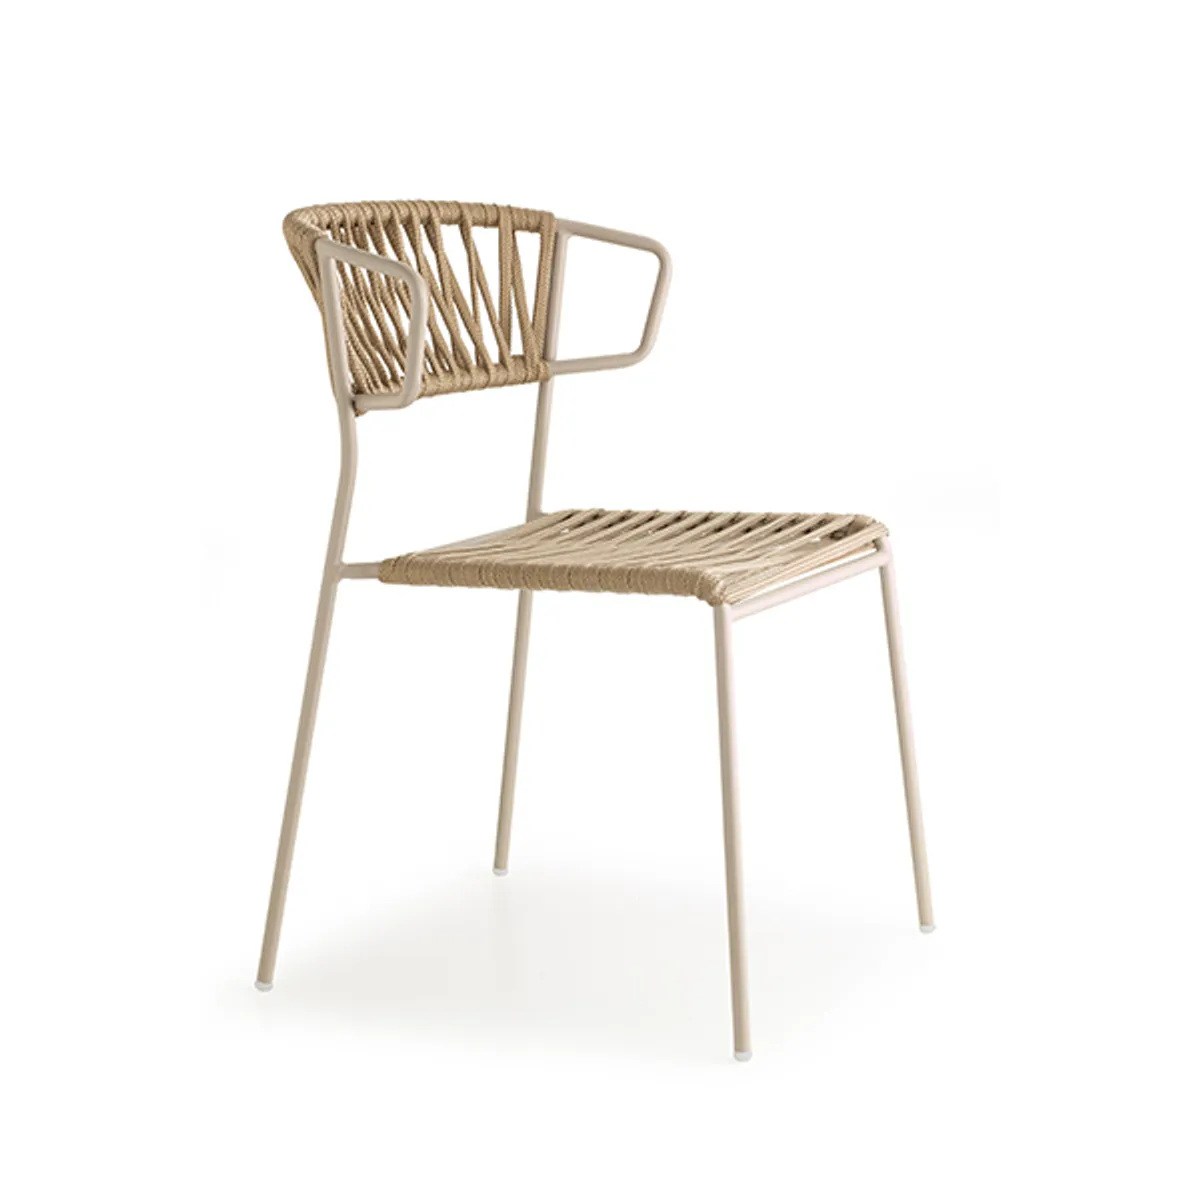 Robyn Weave Chair Outdoor Hospitality Furniture Insideoutcontracts